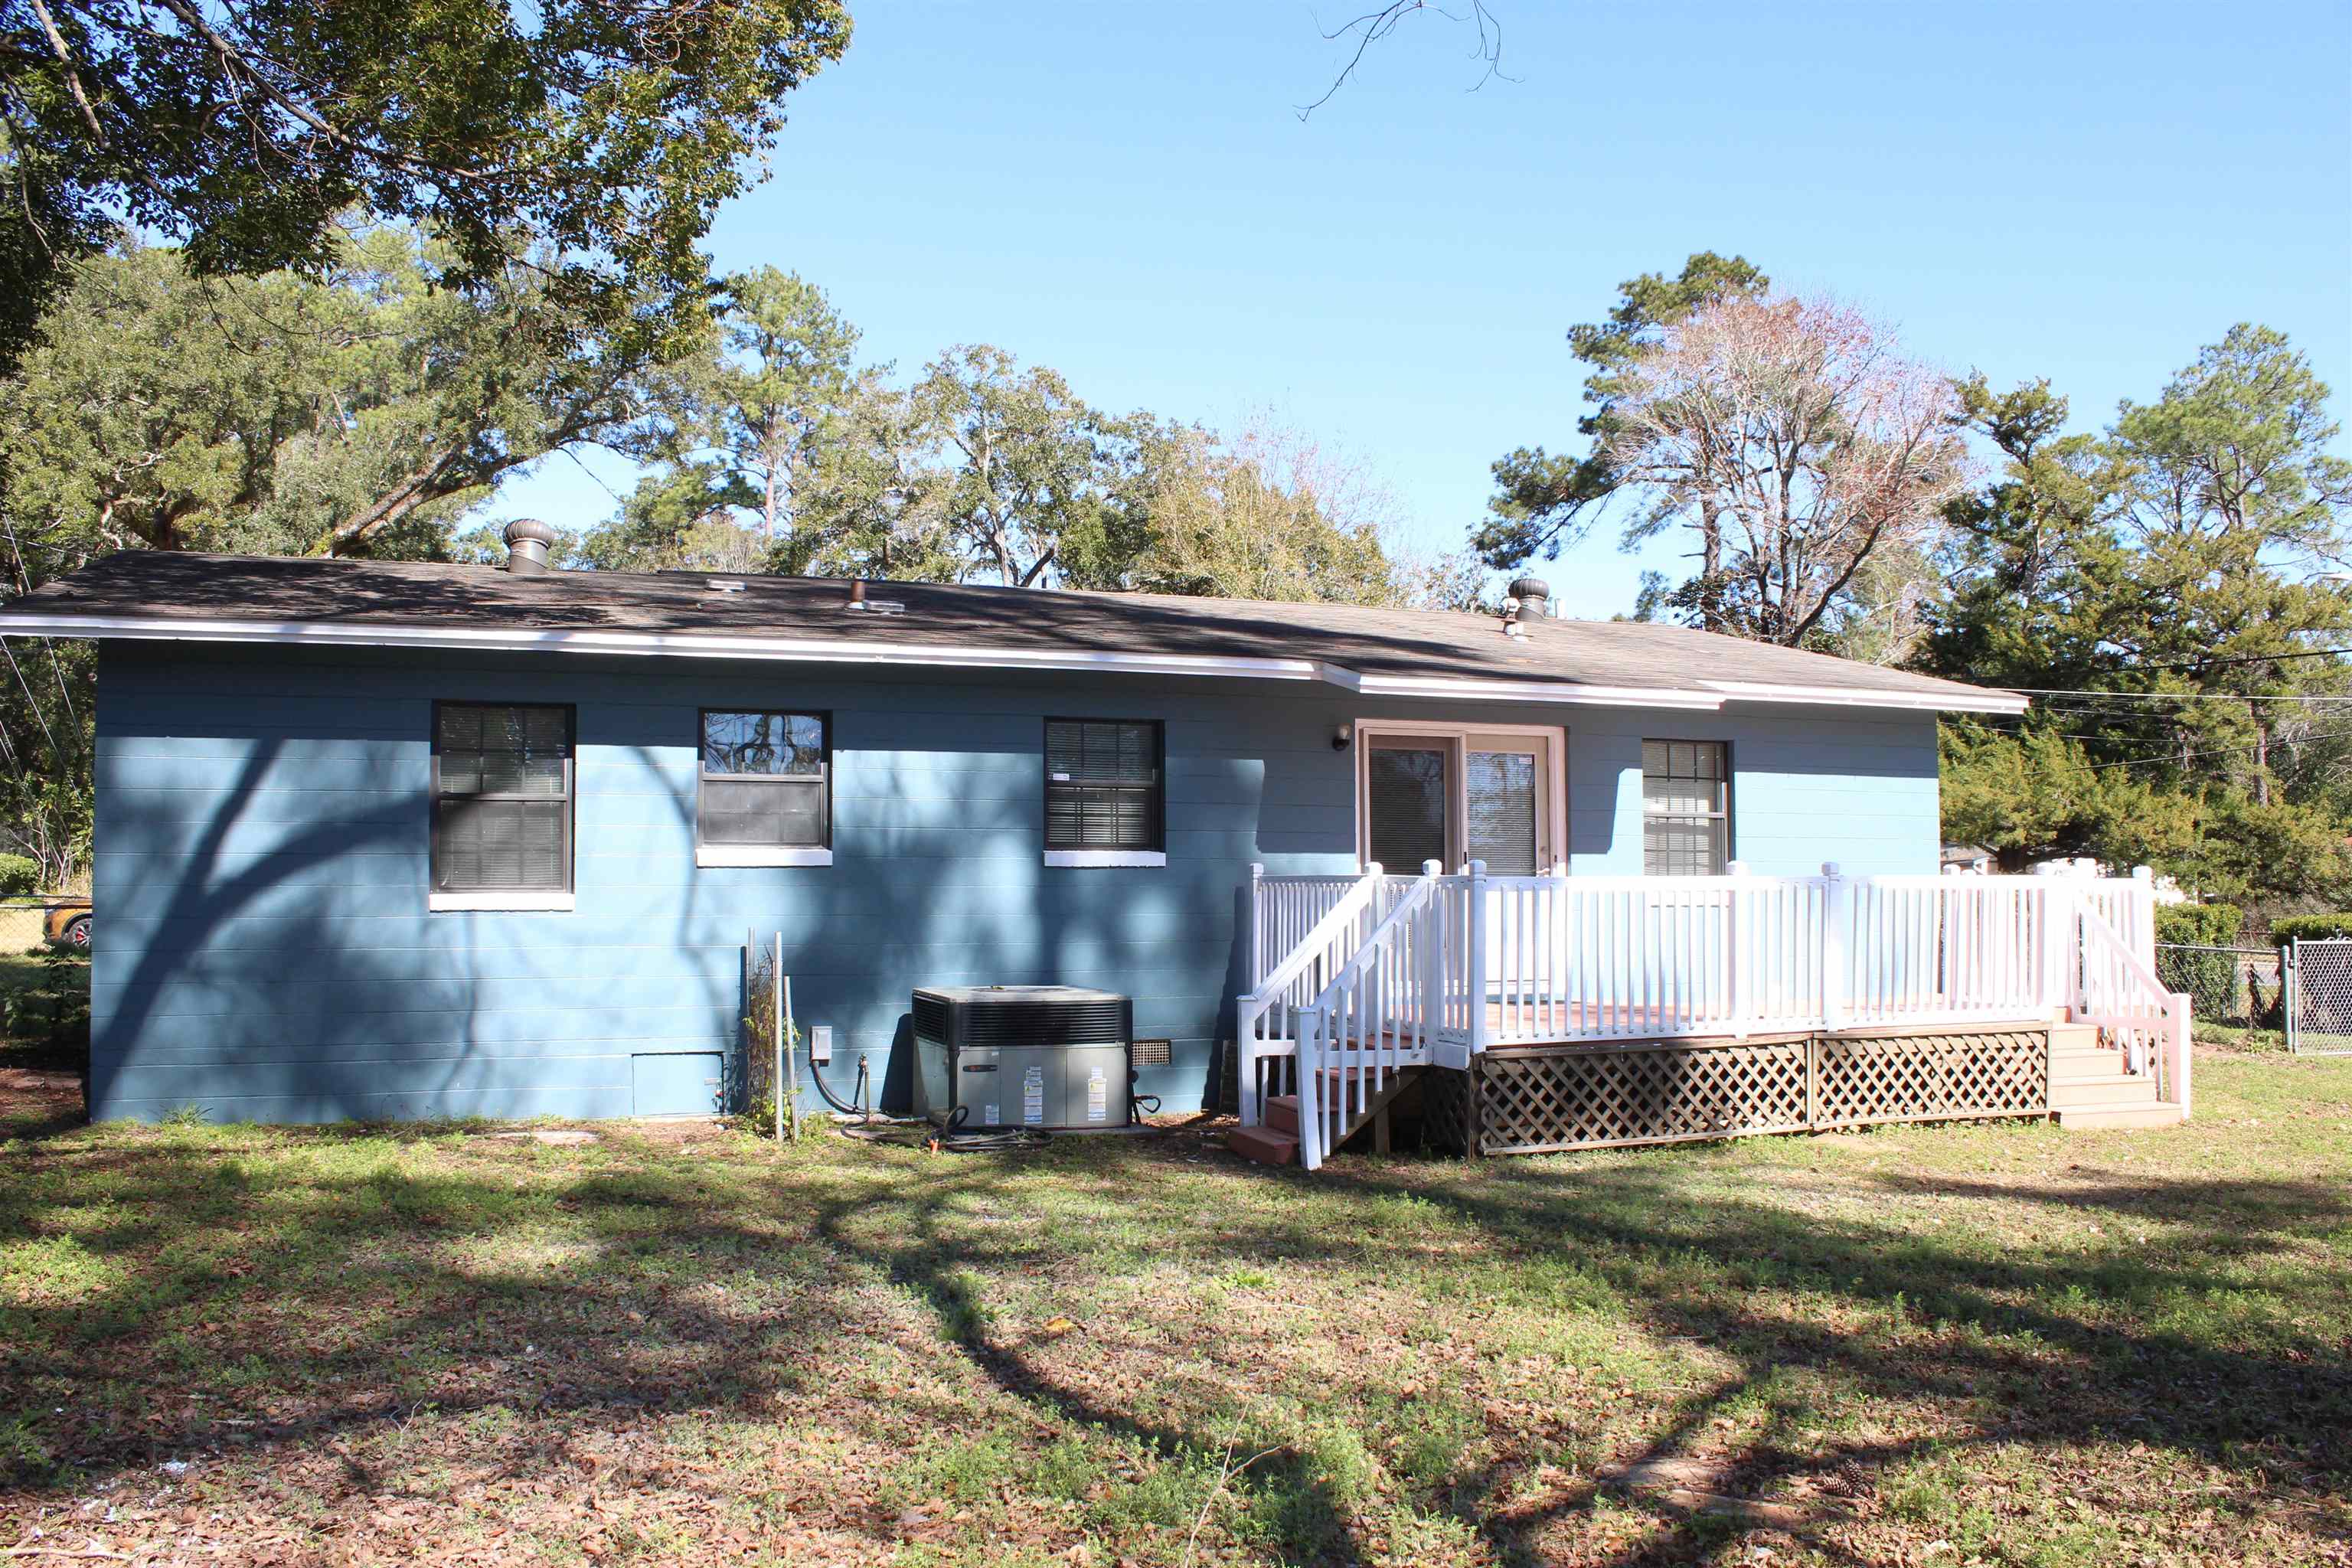 313 Kux Avenue,TALLAHASSEE,Florida 32301,3 Bedrooms Bedrooms,1 BathroomBathrooms,Detached single family,313 Kux Avenue,368060